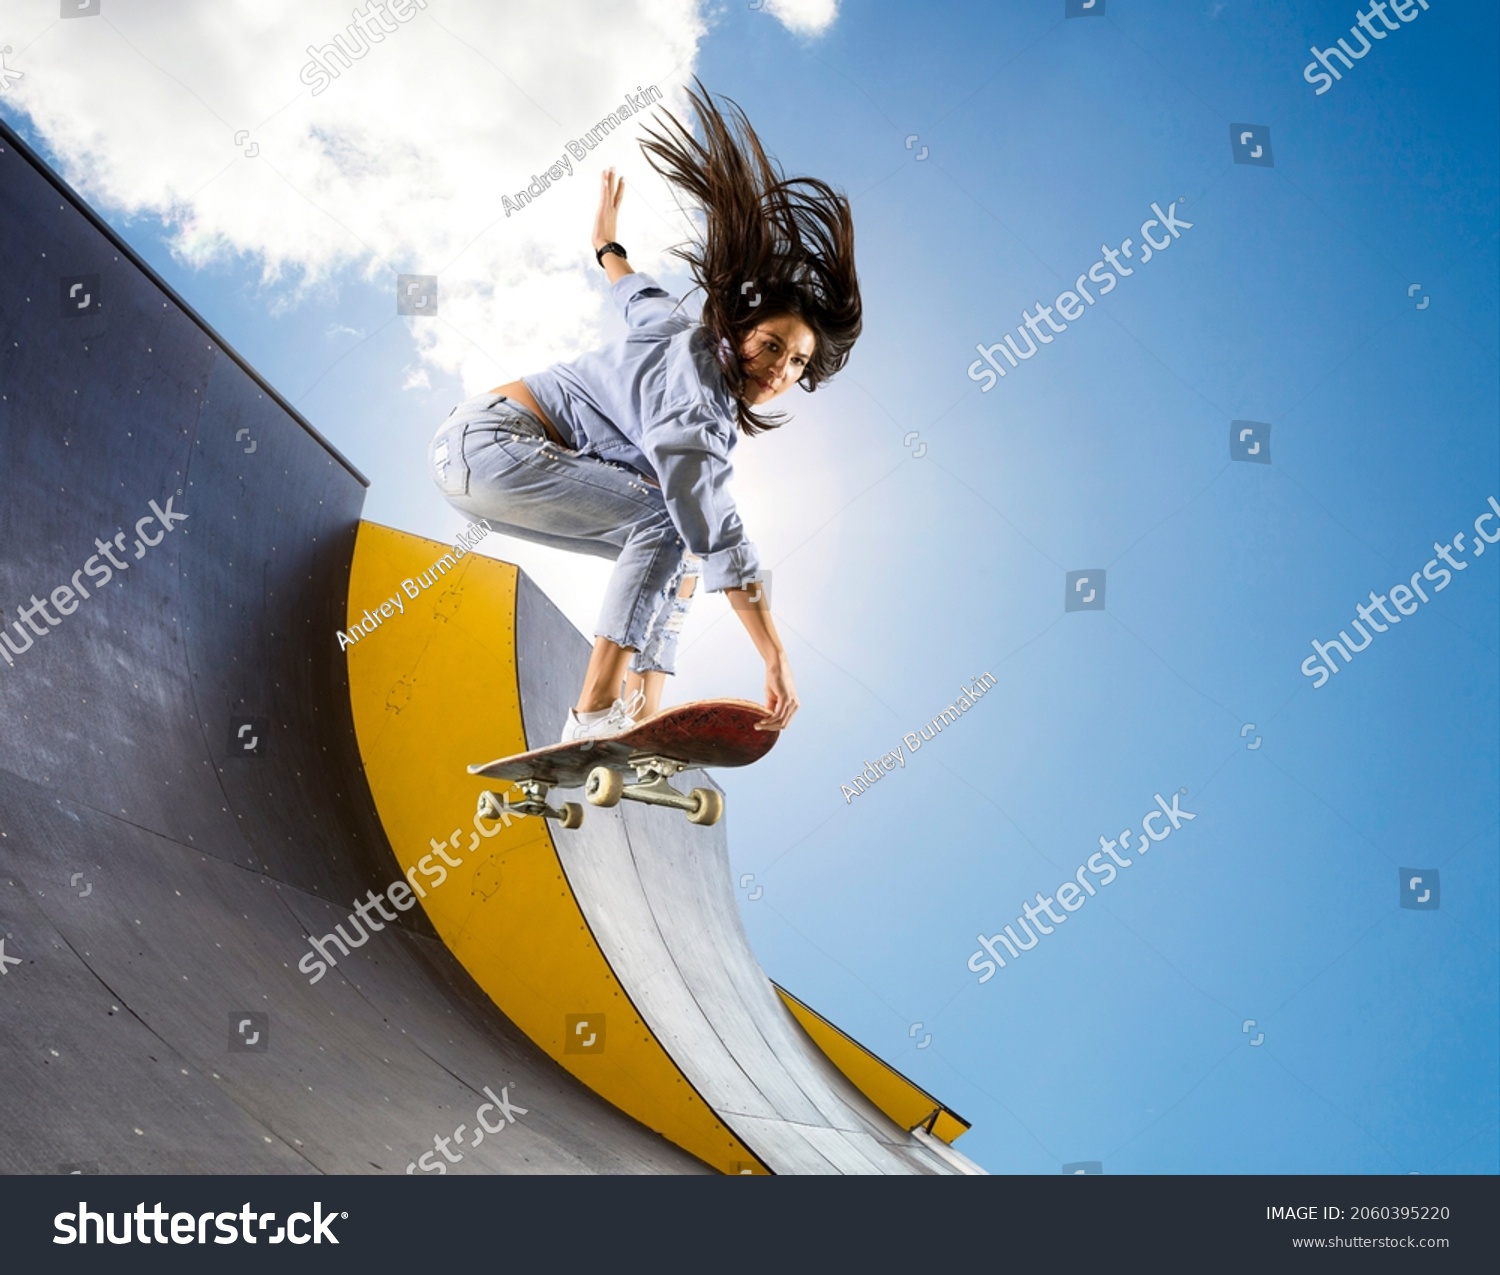 Skateboarder doing a jumping trick. Freestyle extreme sports concept #2060395220